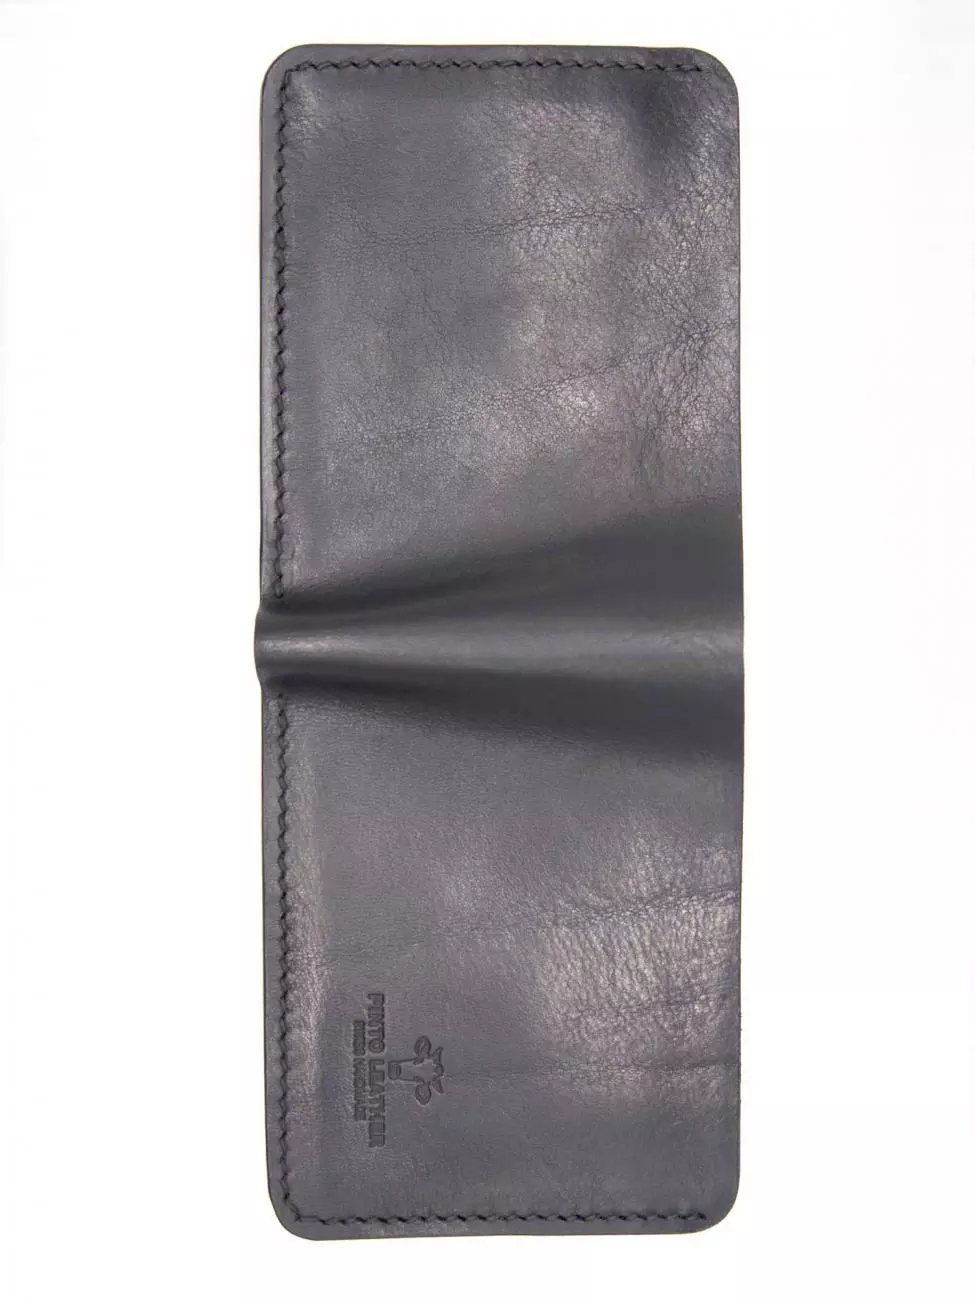 3 - Small leather wallet